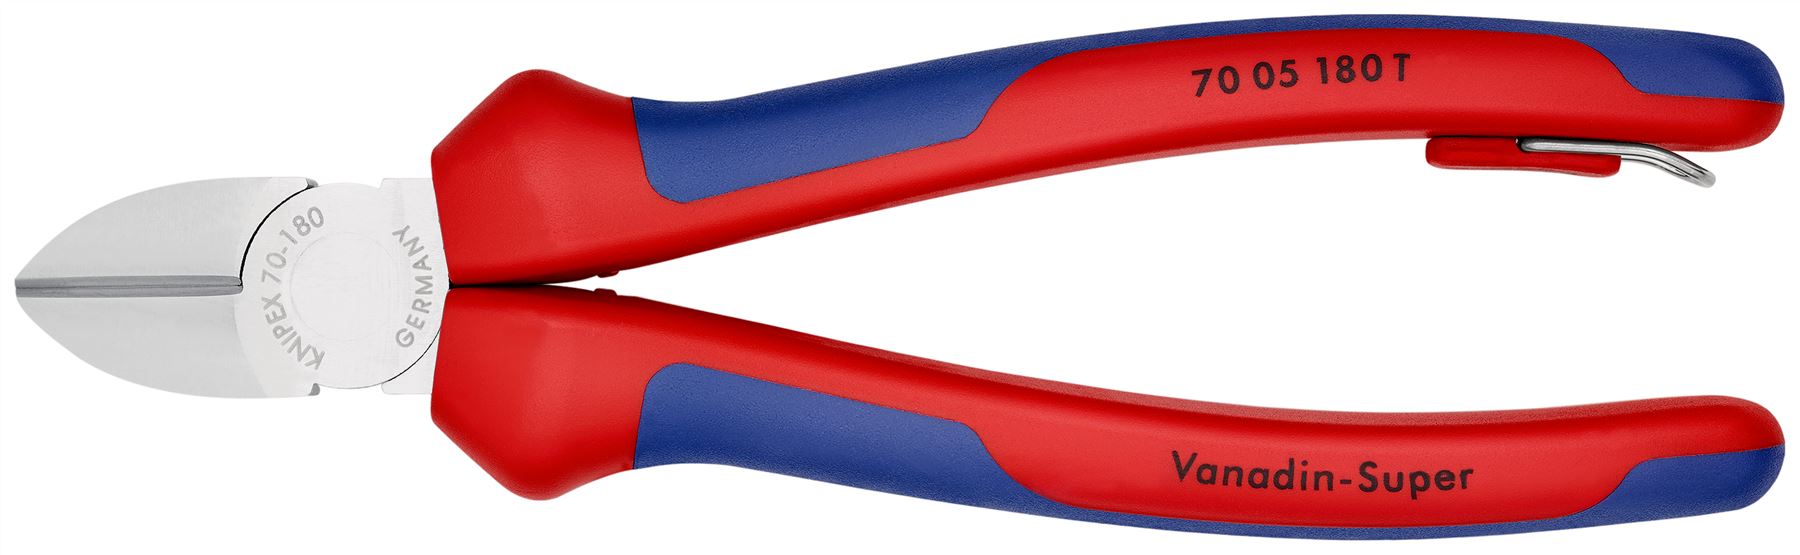 Knipex Diagonal Side Cutting Pliers Chrome 180mm Multi Component Grips with Tether Point 70 05 180 T